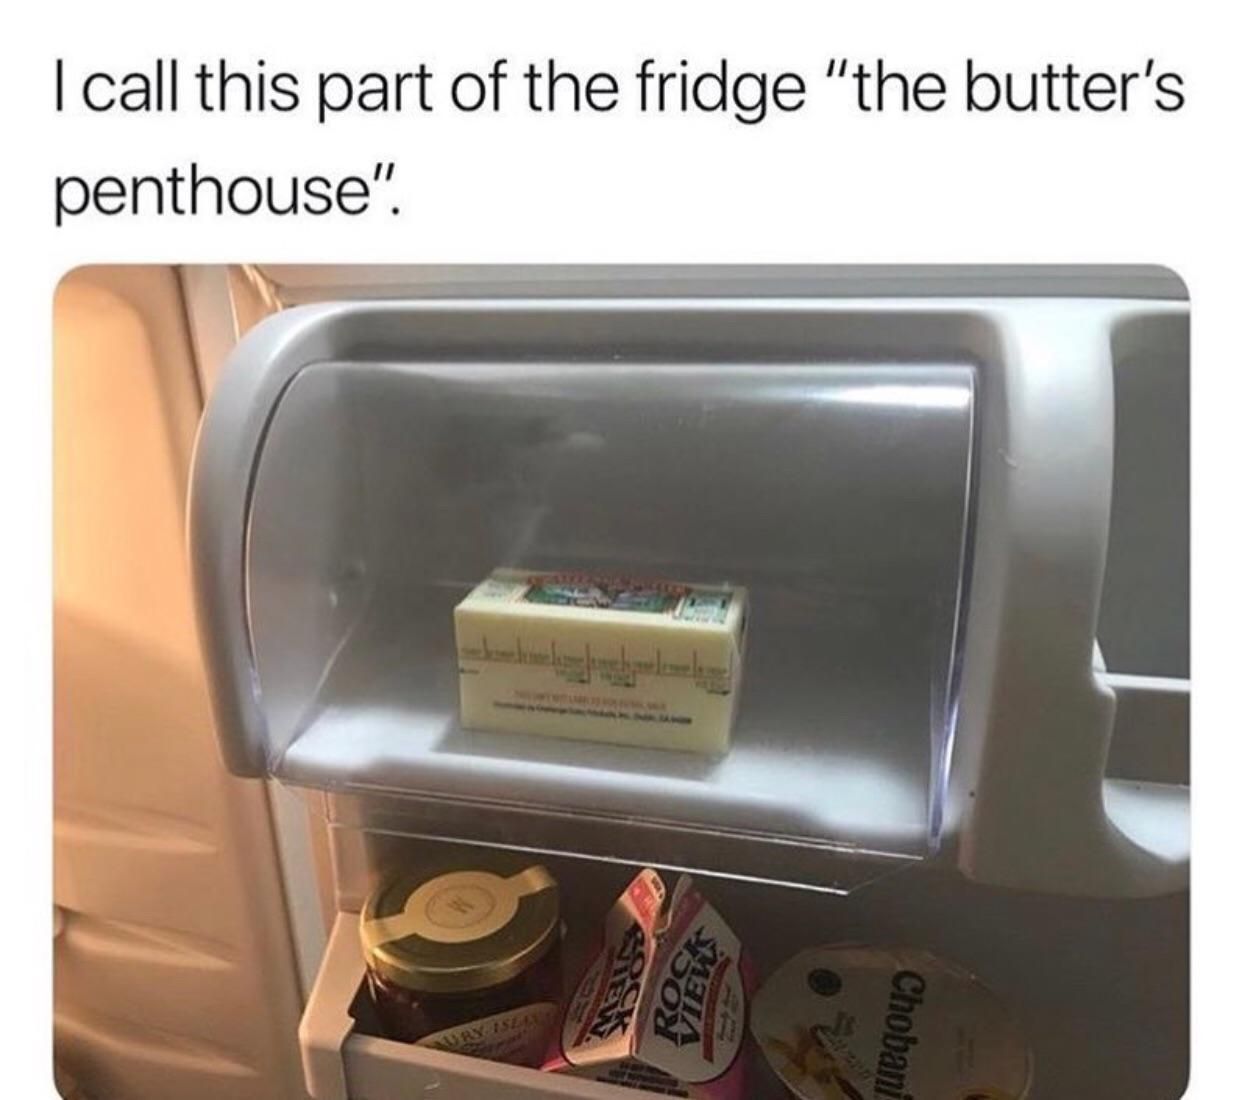 The butter’s penthouse.